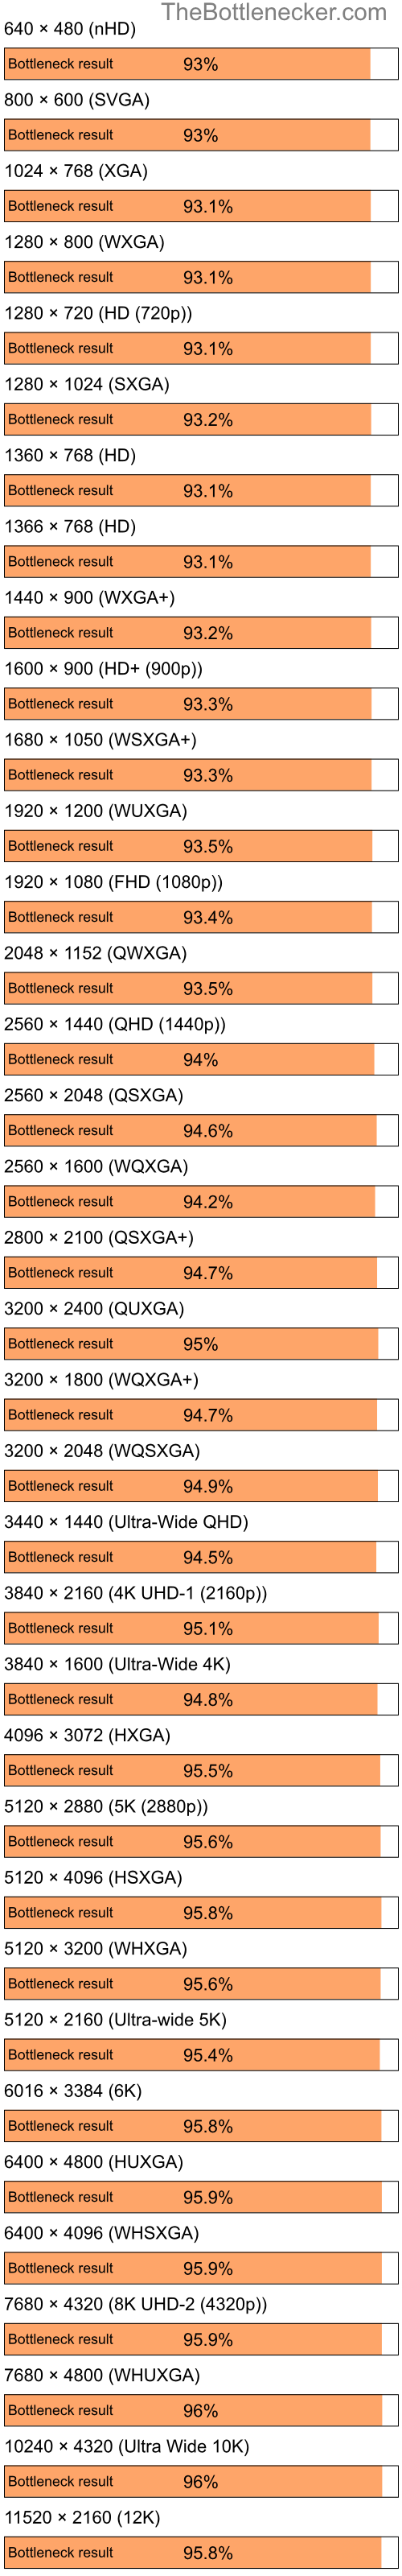 Bottleneck results by resolution for Intel Celeron M 410 and NVIDIA GeForce2 MX 100 in Graphic Card Intense Tasks